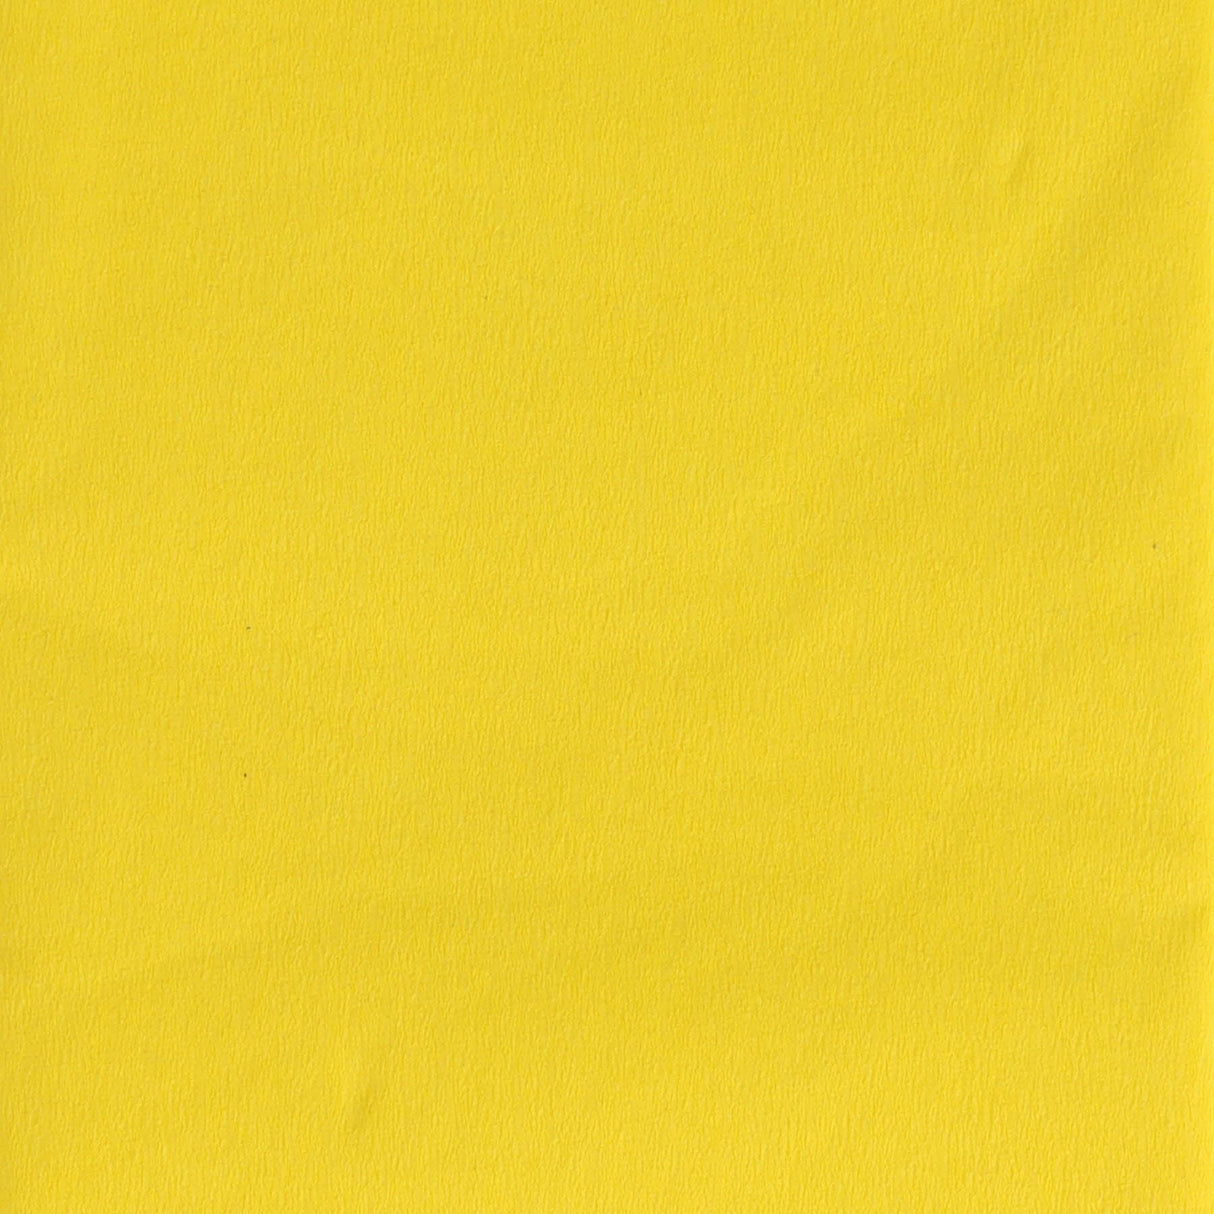 Icon Crepe Paper - 17gsm - 50cm x 250cm - Daffodil Yellow | Stationery Shop UK